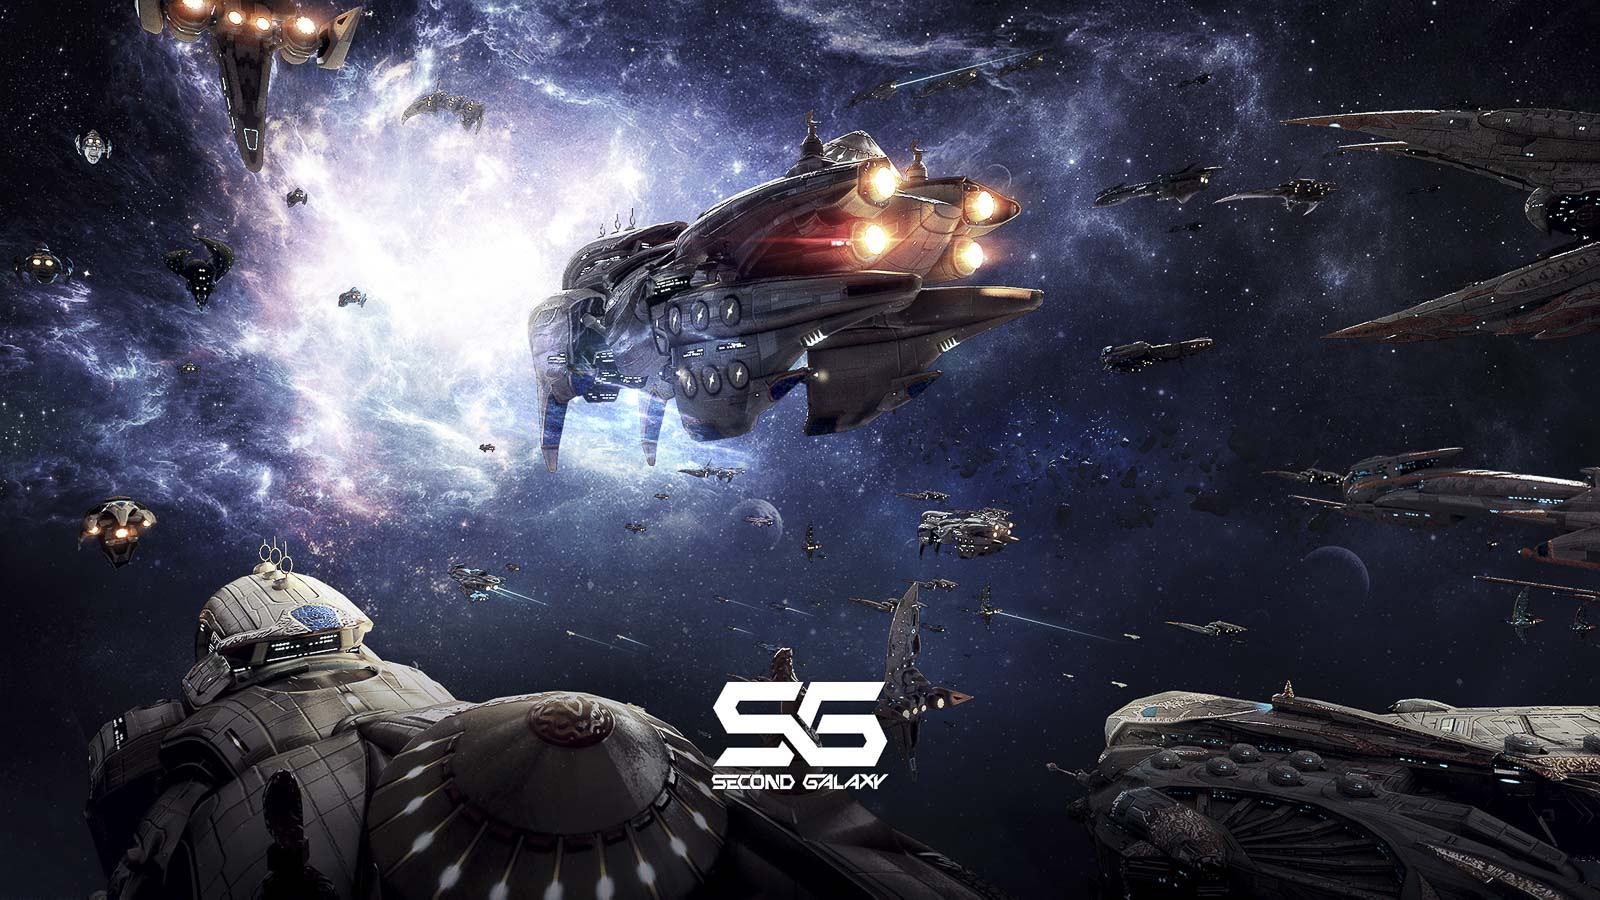 Second Galaxy Combat Ships Guide How To Become An Ace Pilot In